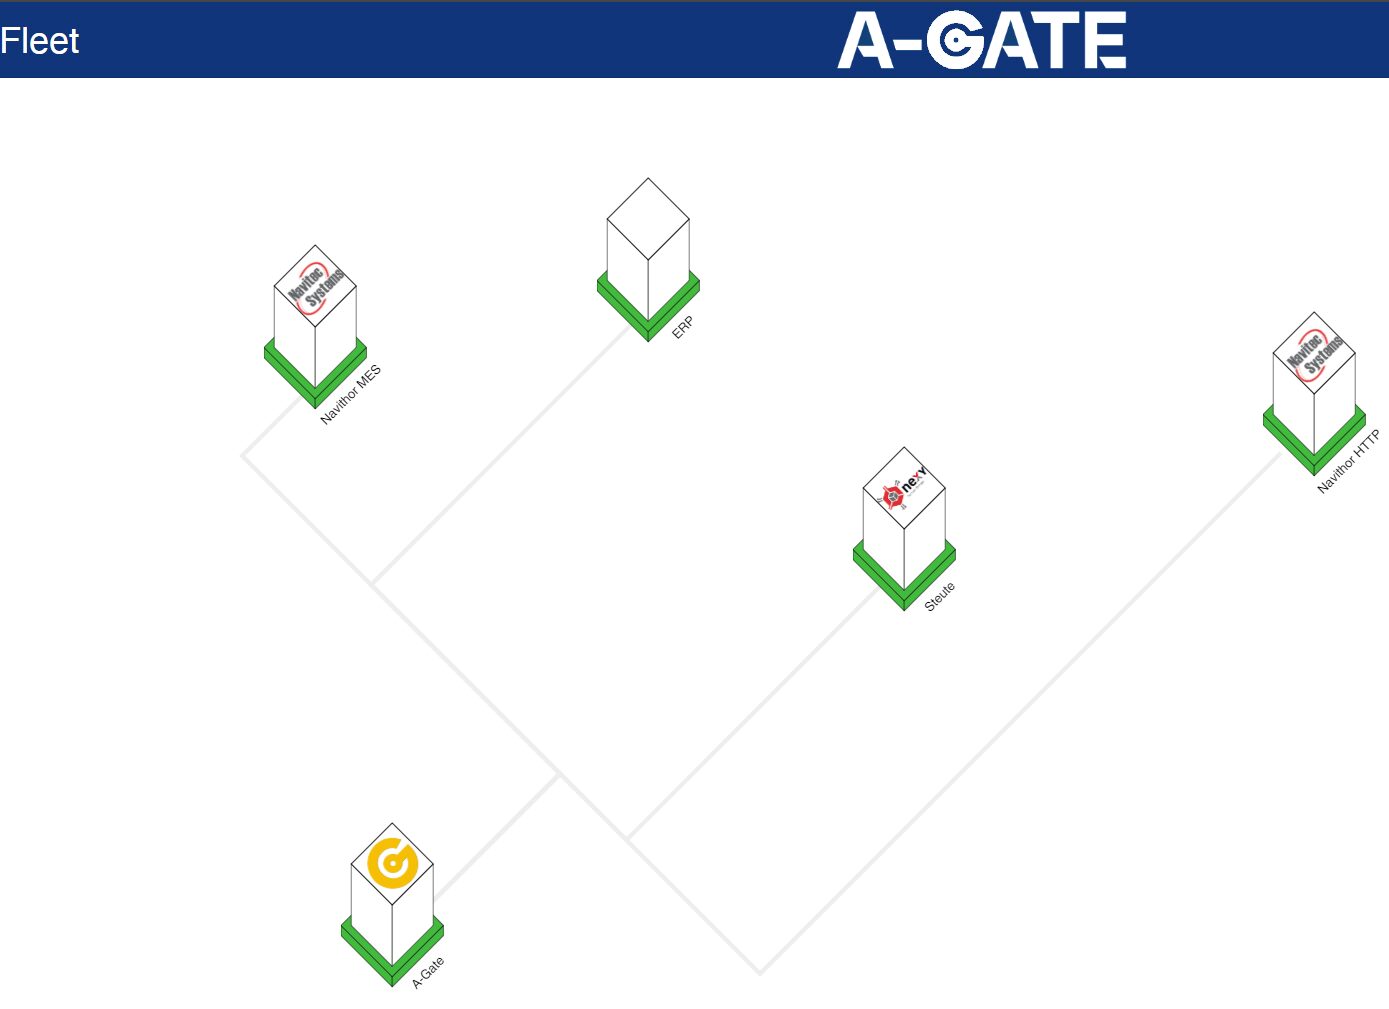 Our new middleware A-GATE as multi-konnective gateway for integrative AGV solutions